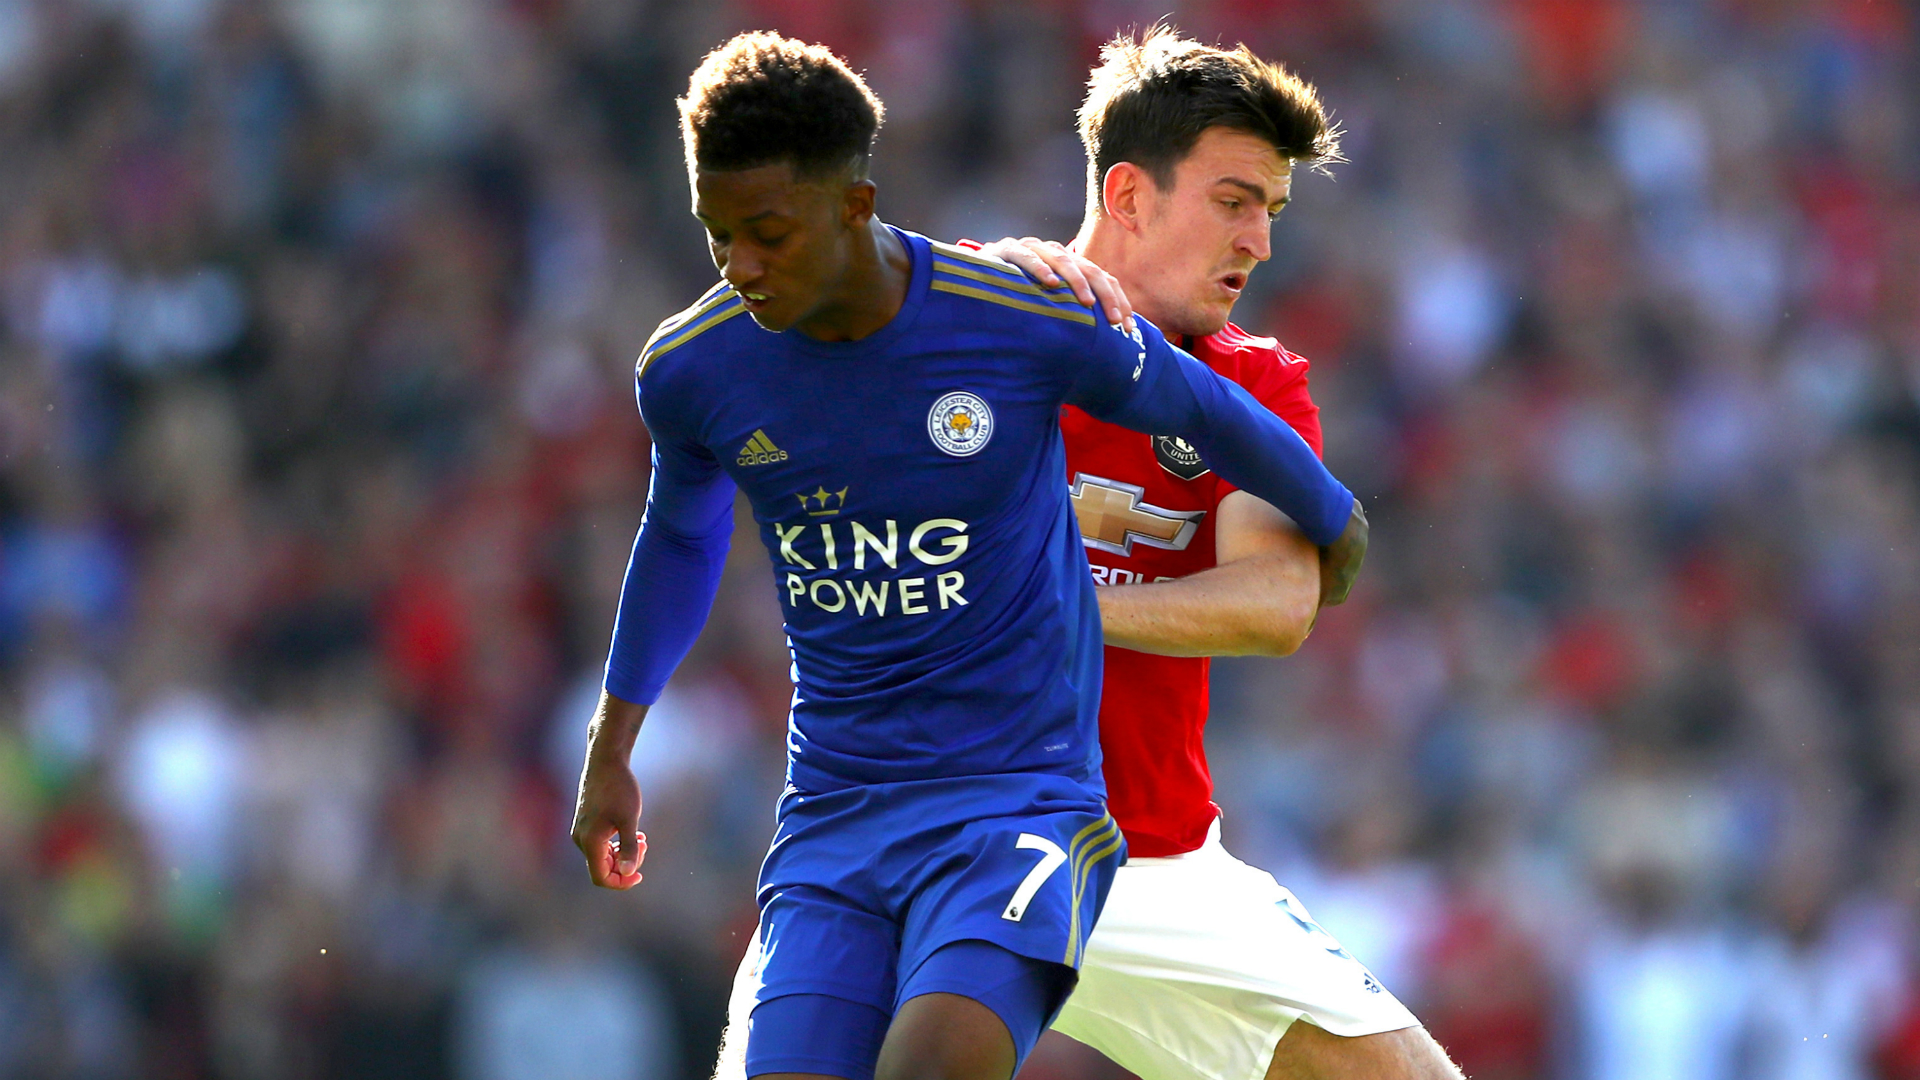 Match Preview: Leicester City vs Manchester United - utdreport